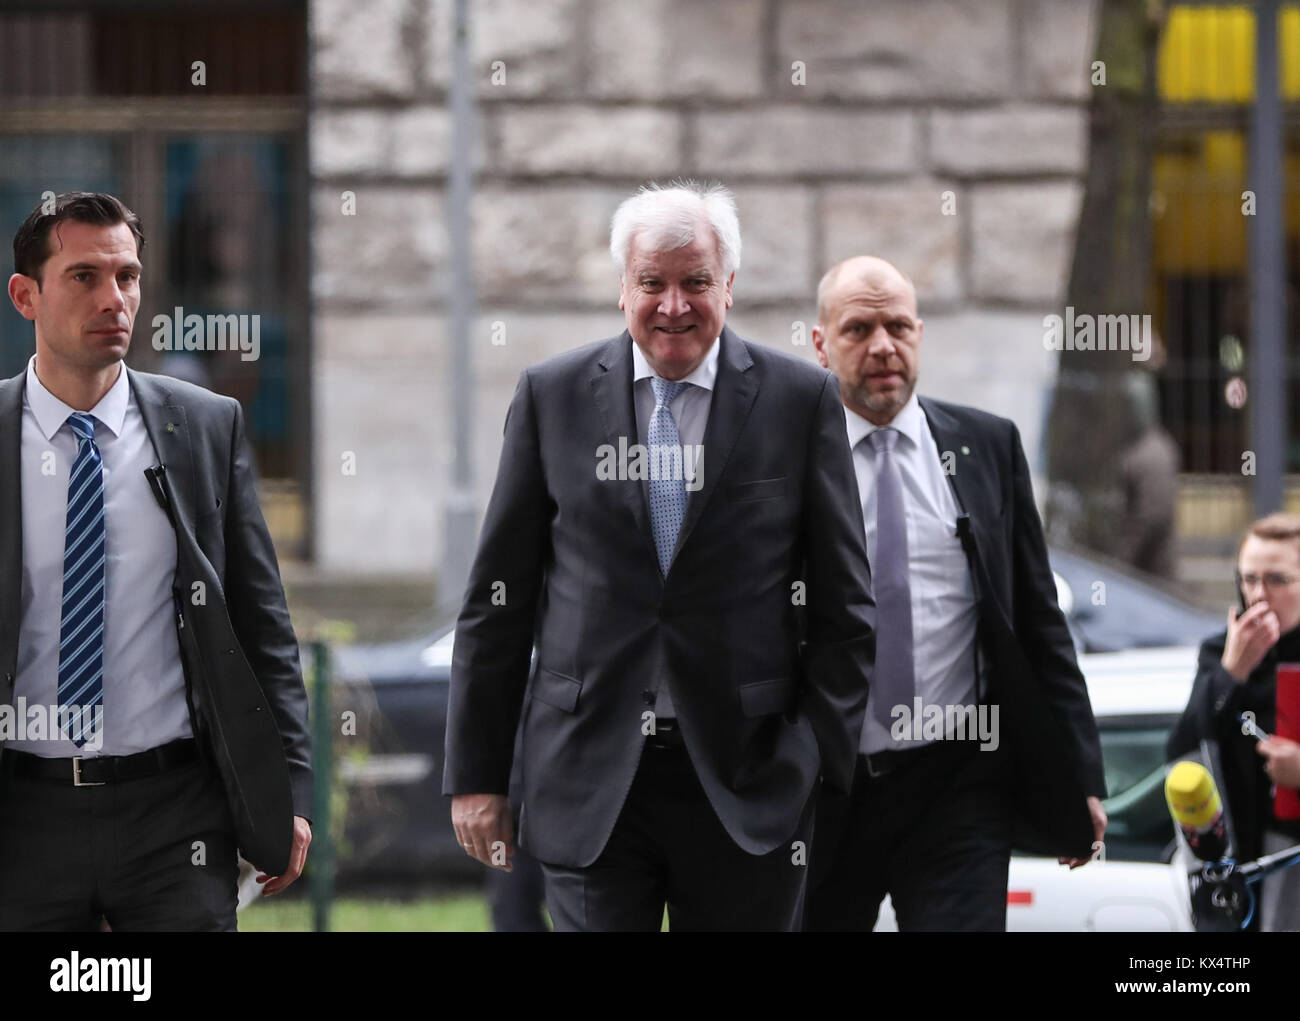 Berlin, Germany. 7th Jan, 2018. Leader of German Christian Social Union (CSU) Horst Seehofer (C) arrives for the exploratory talks for a new coalition government between the Christian Democratic Union (CDU), the CSU and the Social Democratic Party (SPD) at the headquarters of SPD in Berlin, capital of Germany, on Jan. 7, 2018. Credit: Shan Yuqi/Xinhua/Alamy Live News Stock Photo